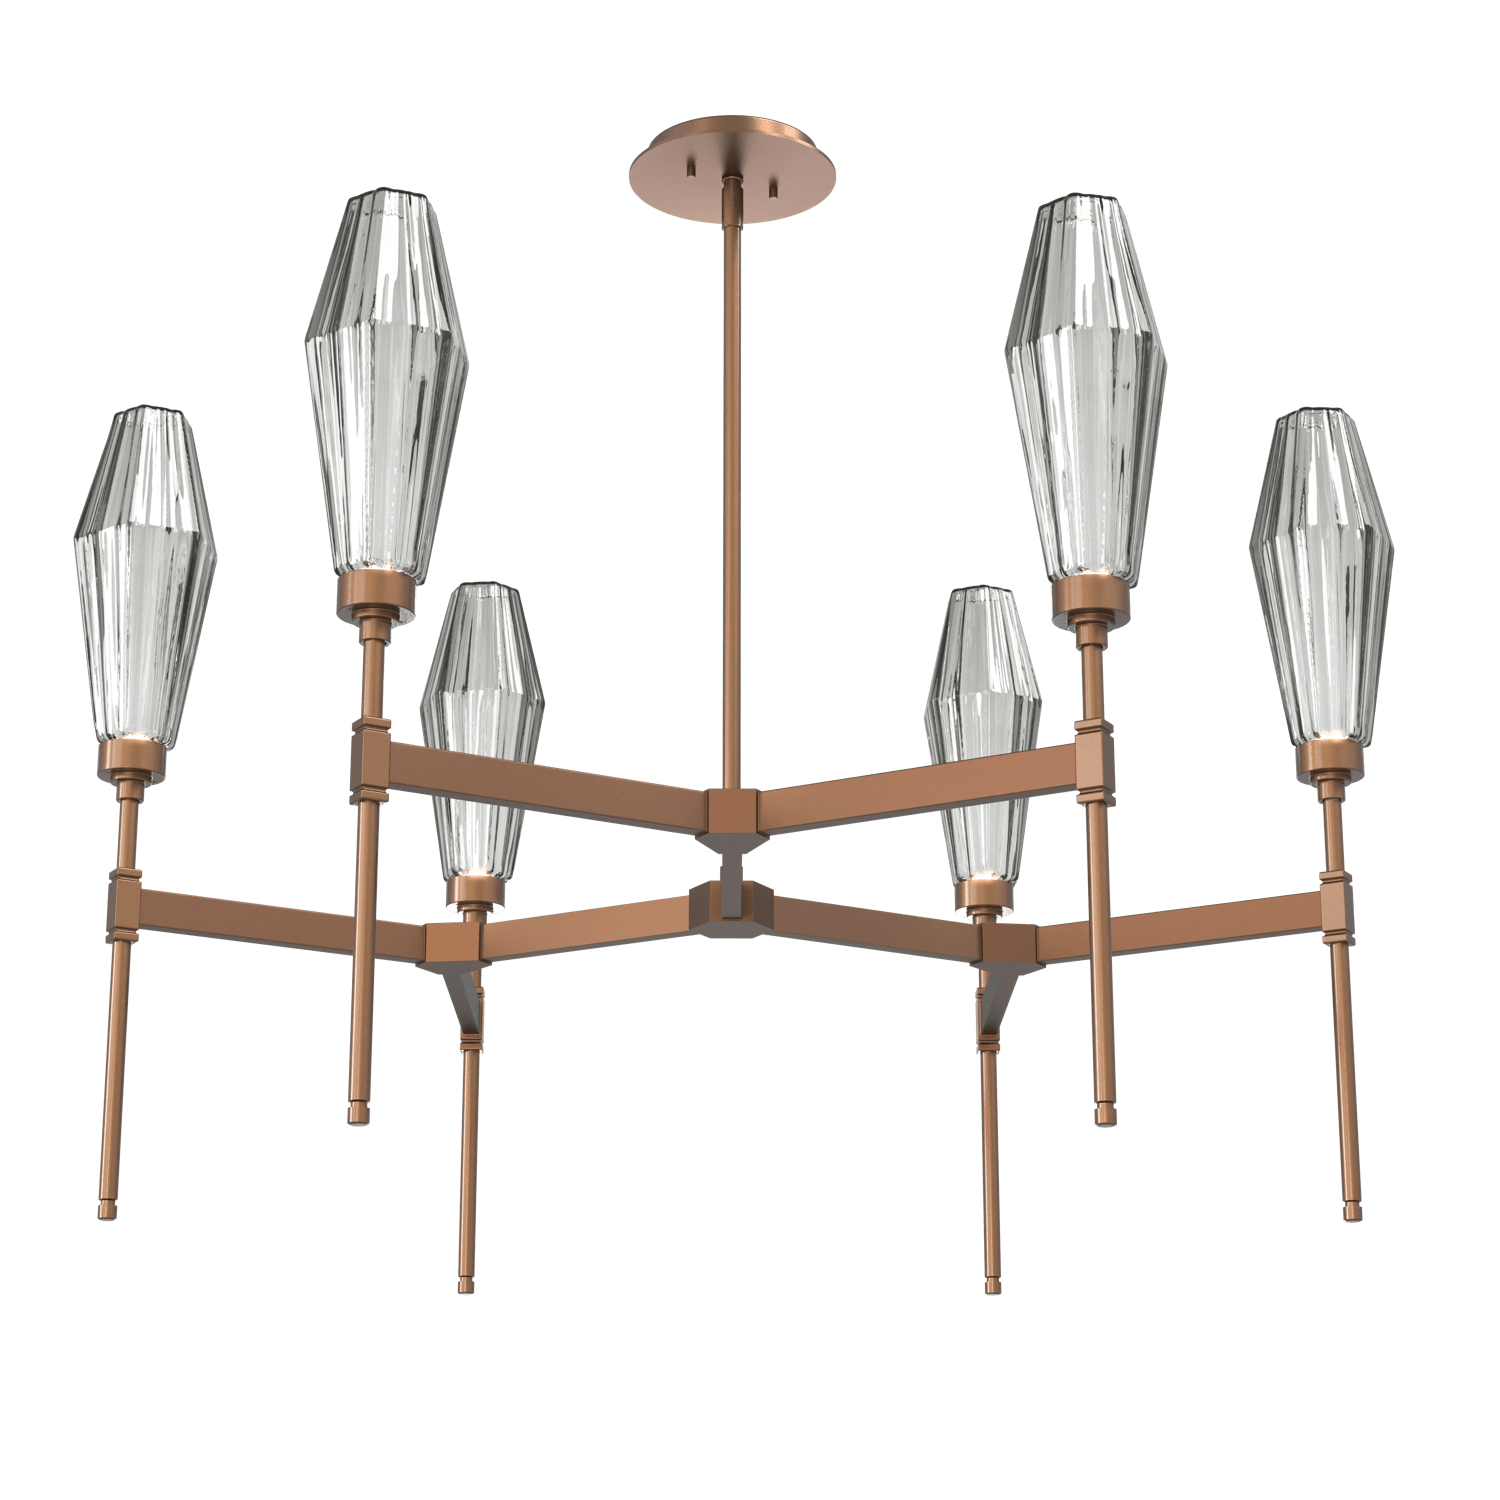 CHB0049-37-BB-RS-Hammerton-Studio-Aalto-37-inch-round-belvedere-chandelier-with-burnished-bronze-finish-and-optic-ribbed-smoke-glass-shades-and-LED-lamping